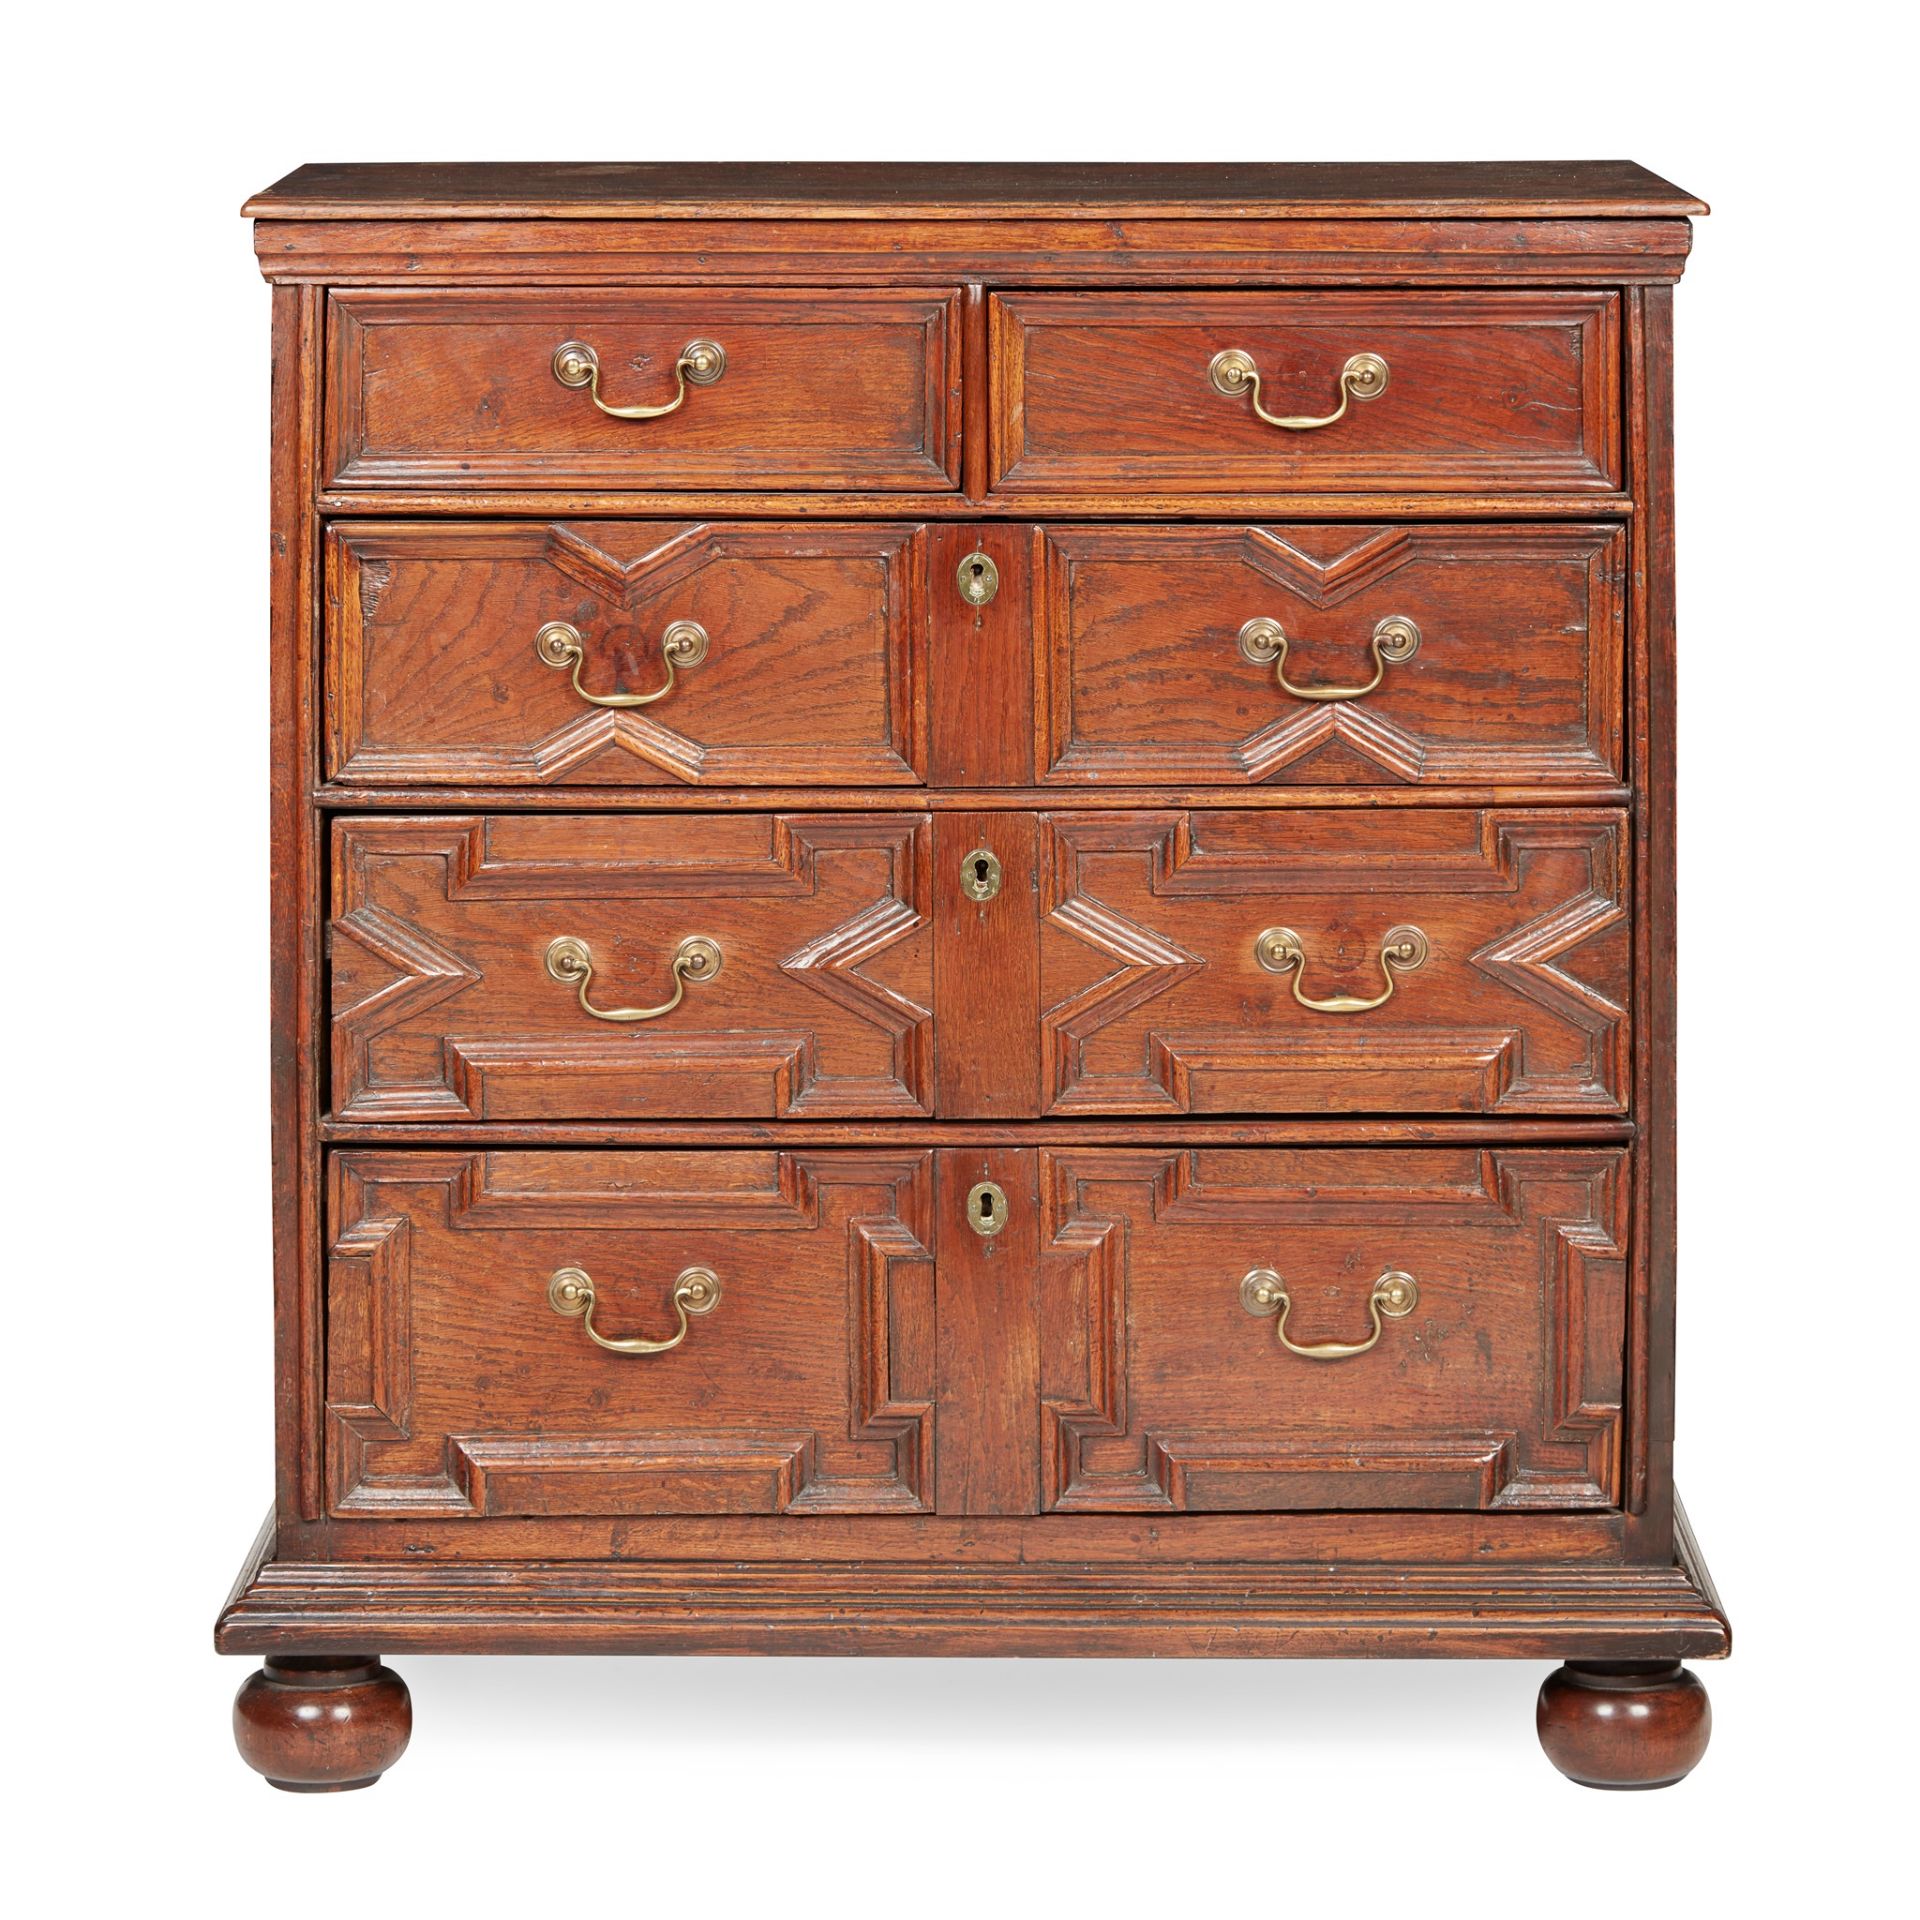 CHARLES II OAK CHEST OF DRAWERS 17TH CENTURY